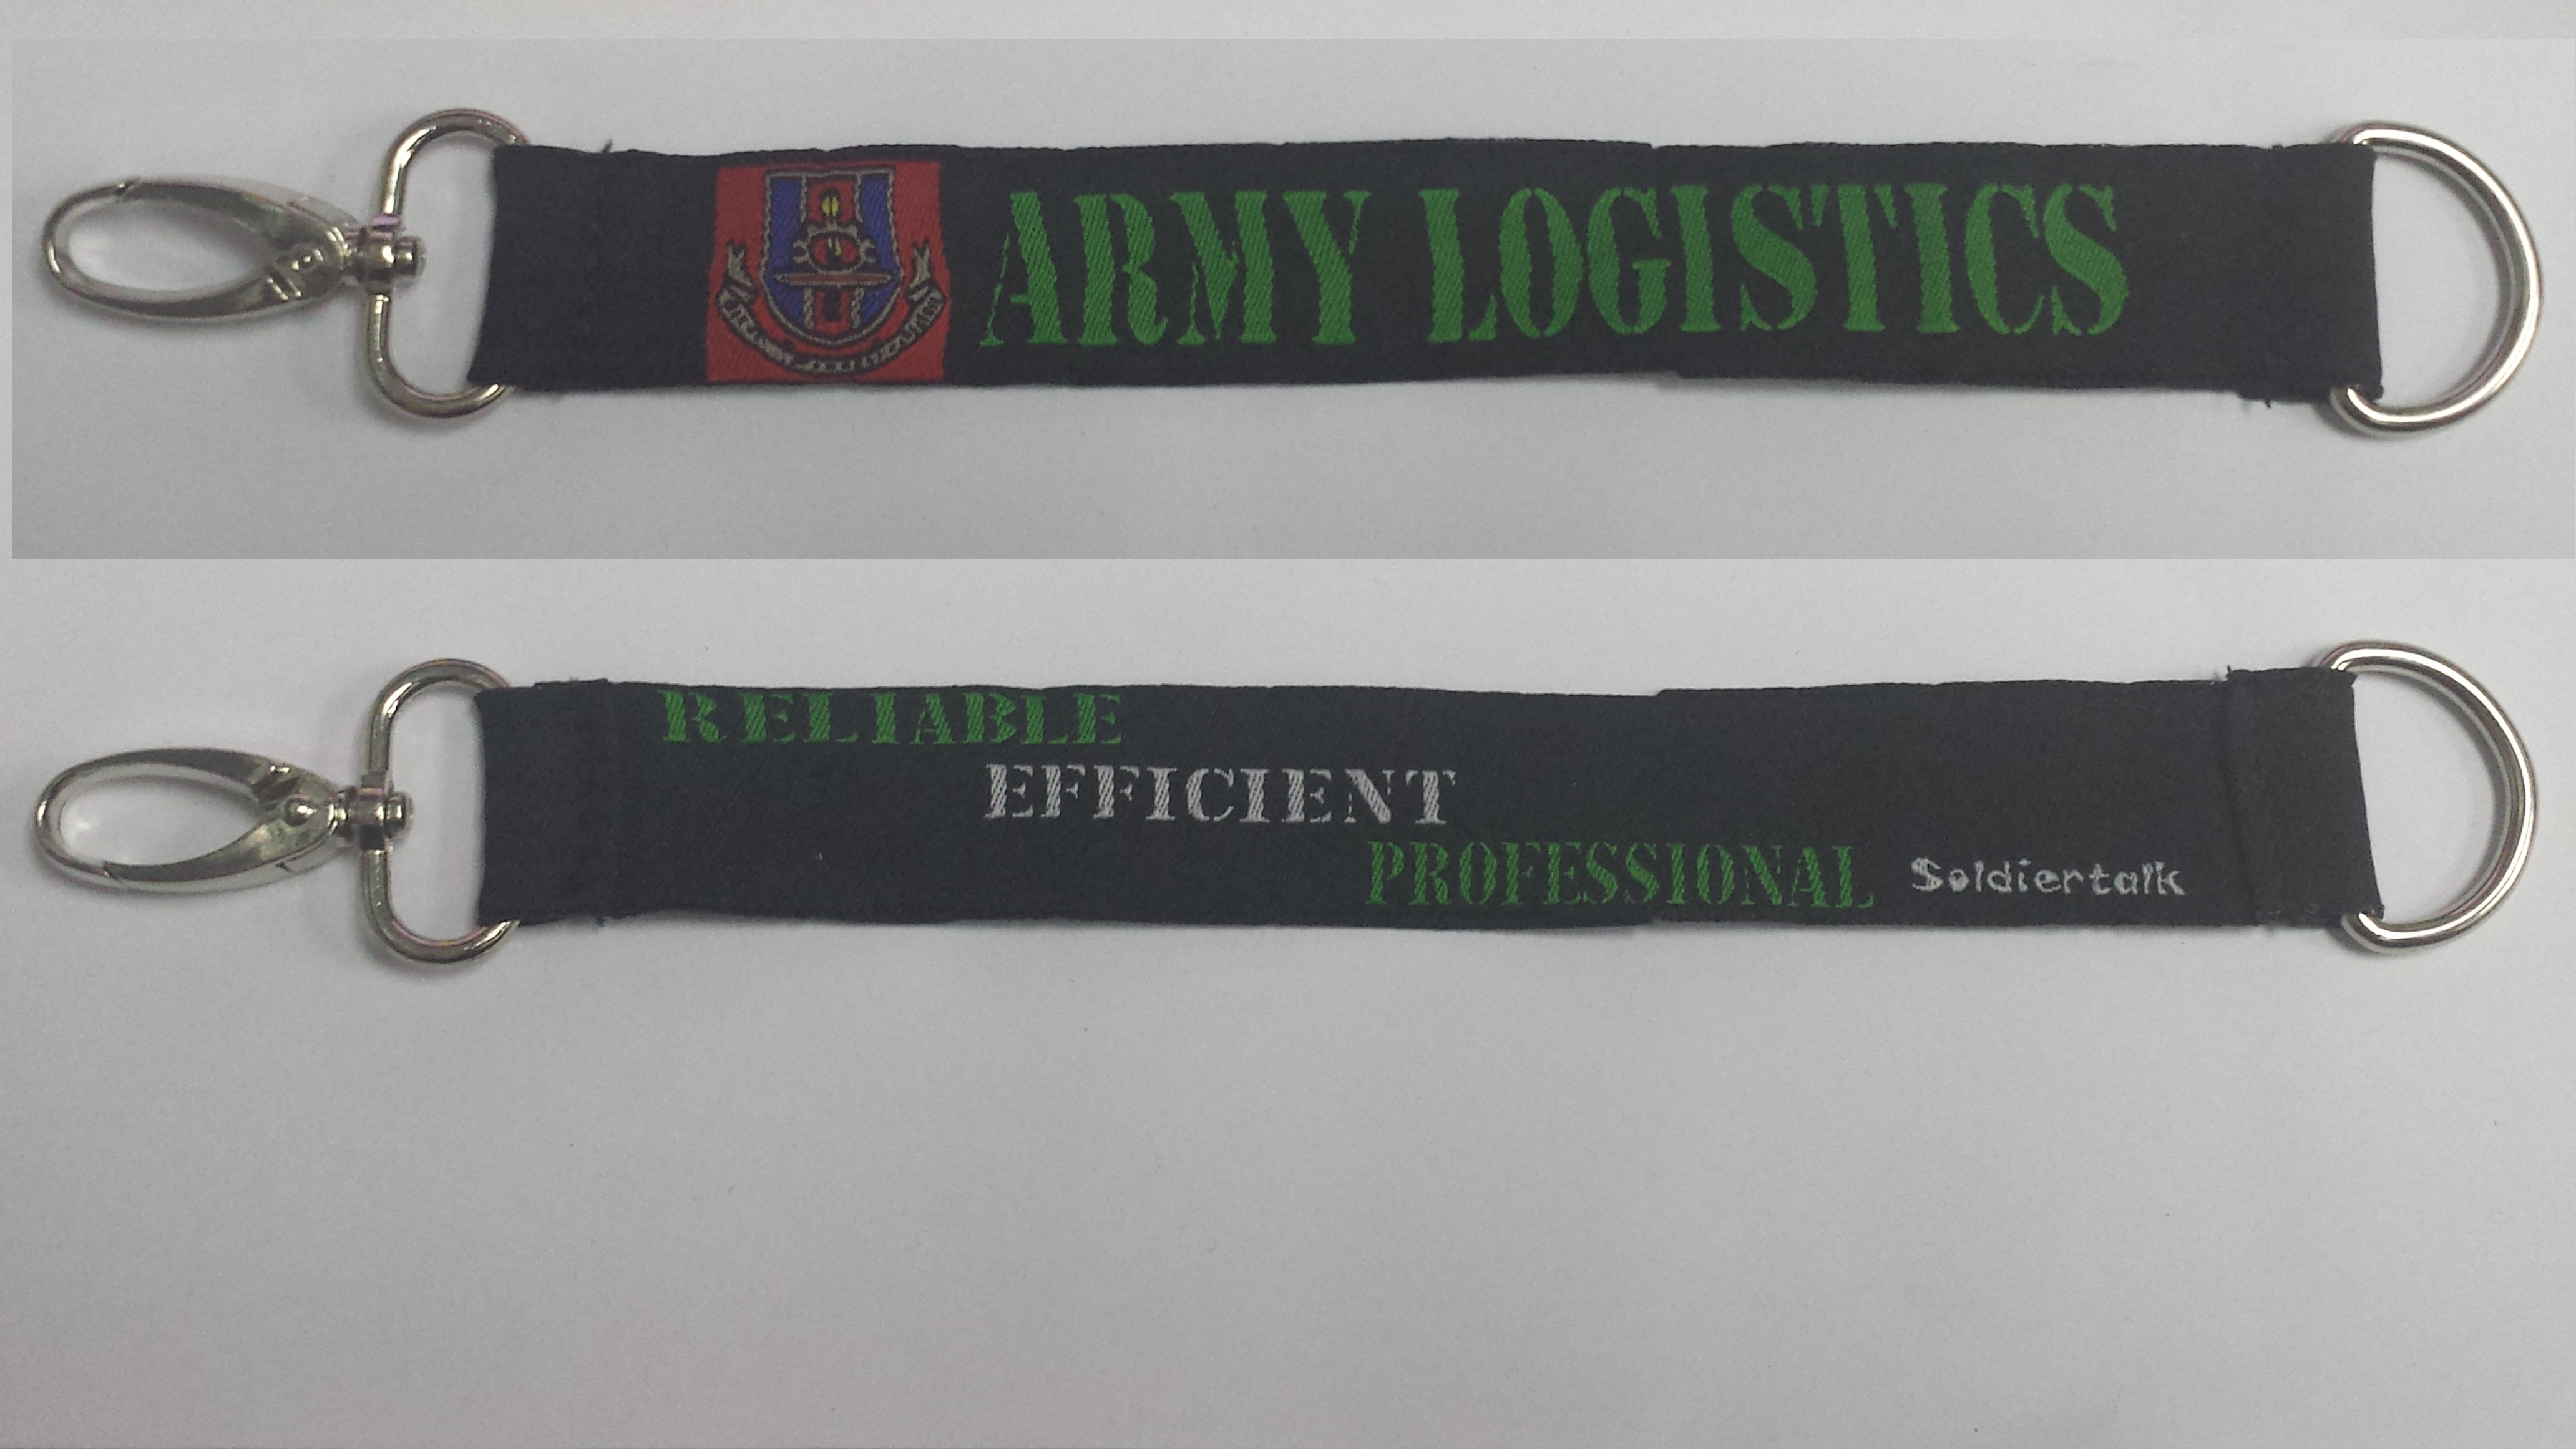 STRIMMERS,ARMY LOGISTICS D&G 1156 